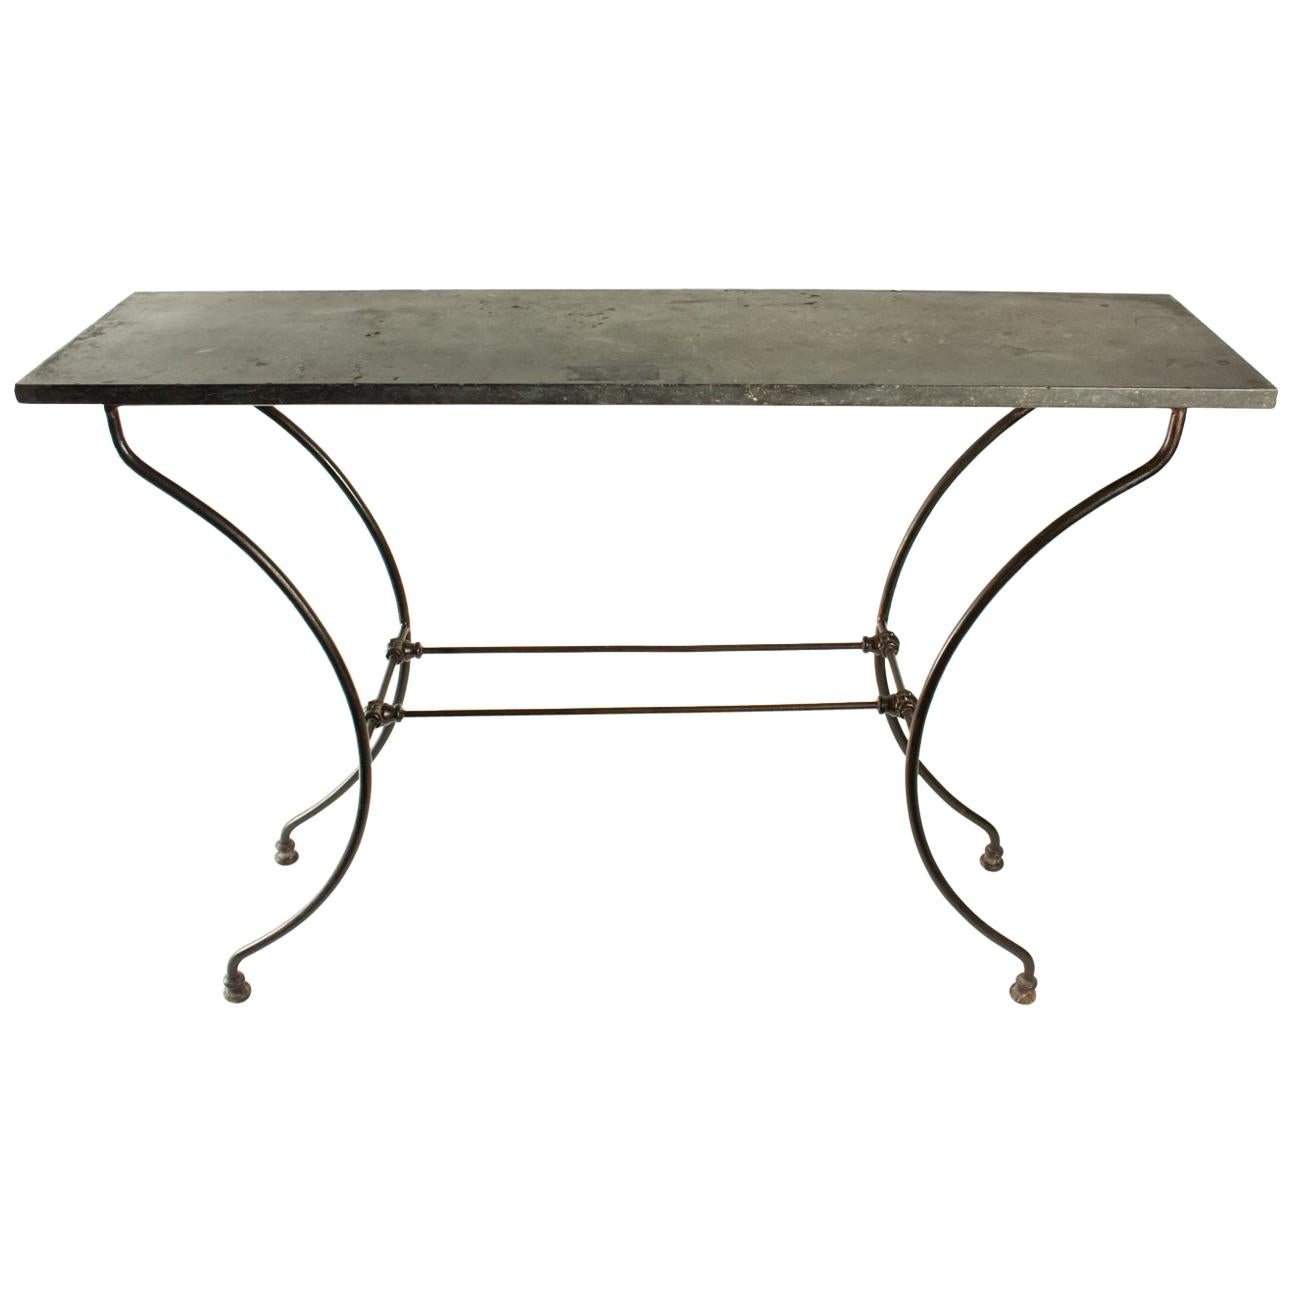 Wrought Iron Console with Marble Top, 19th Century, Period Napoleon III